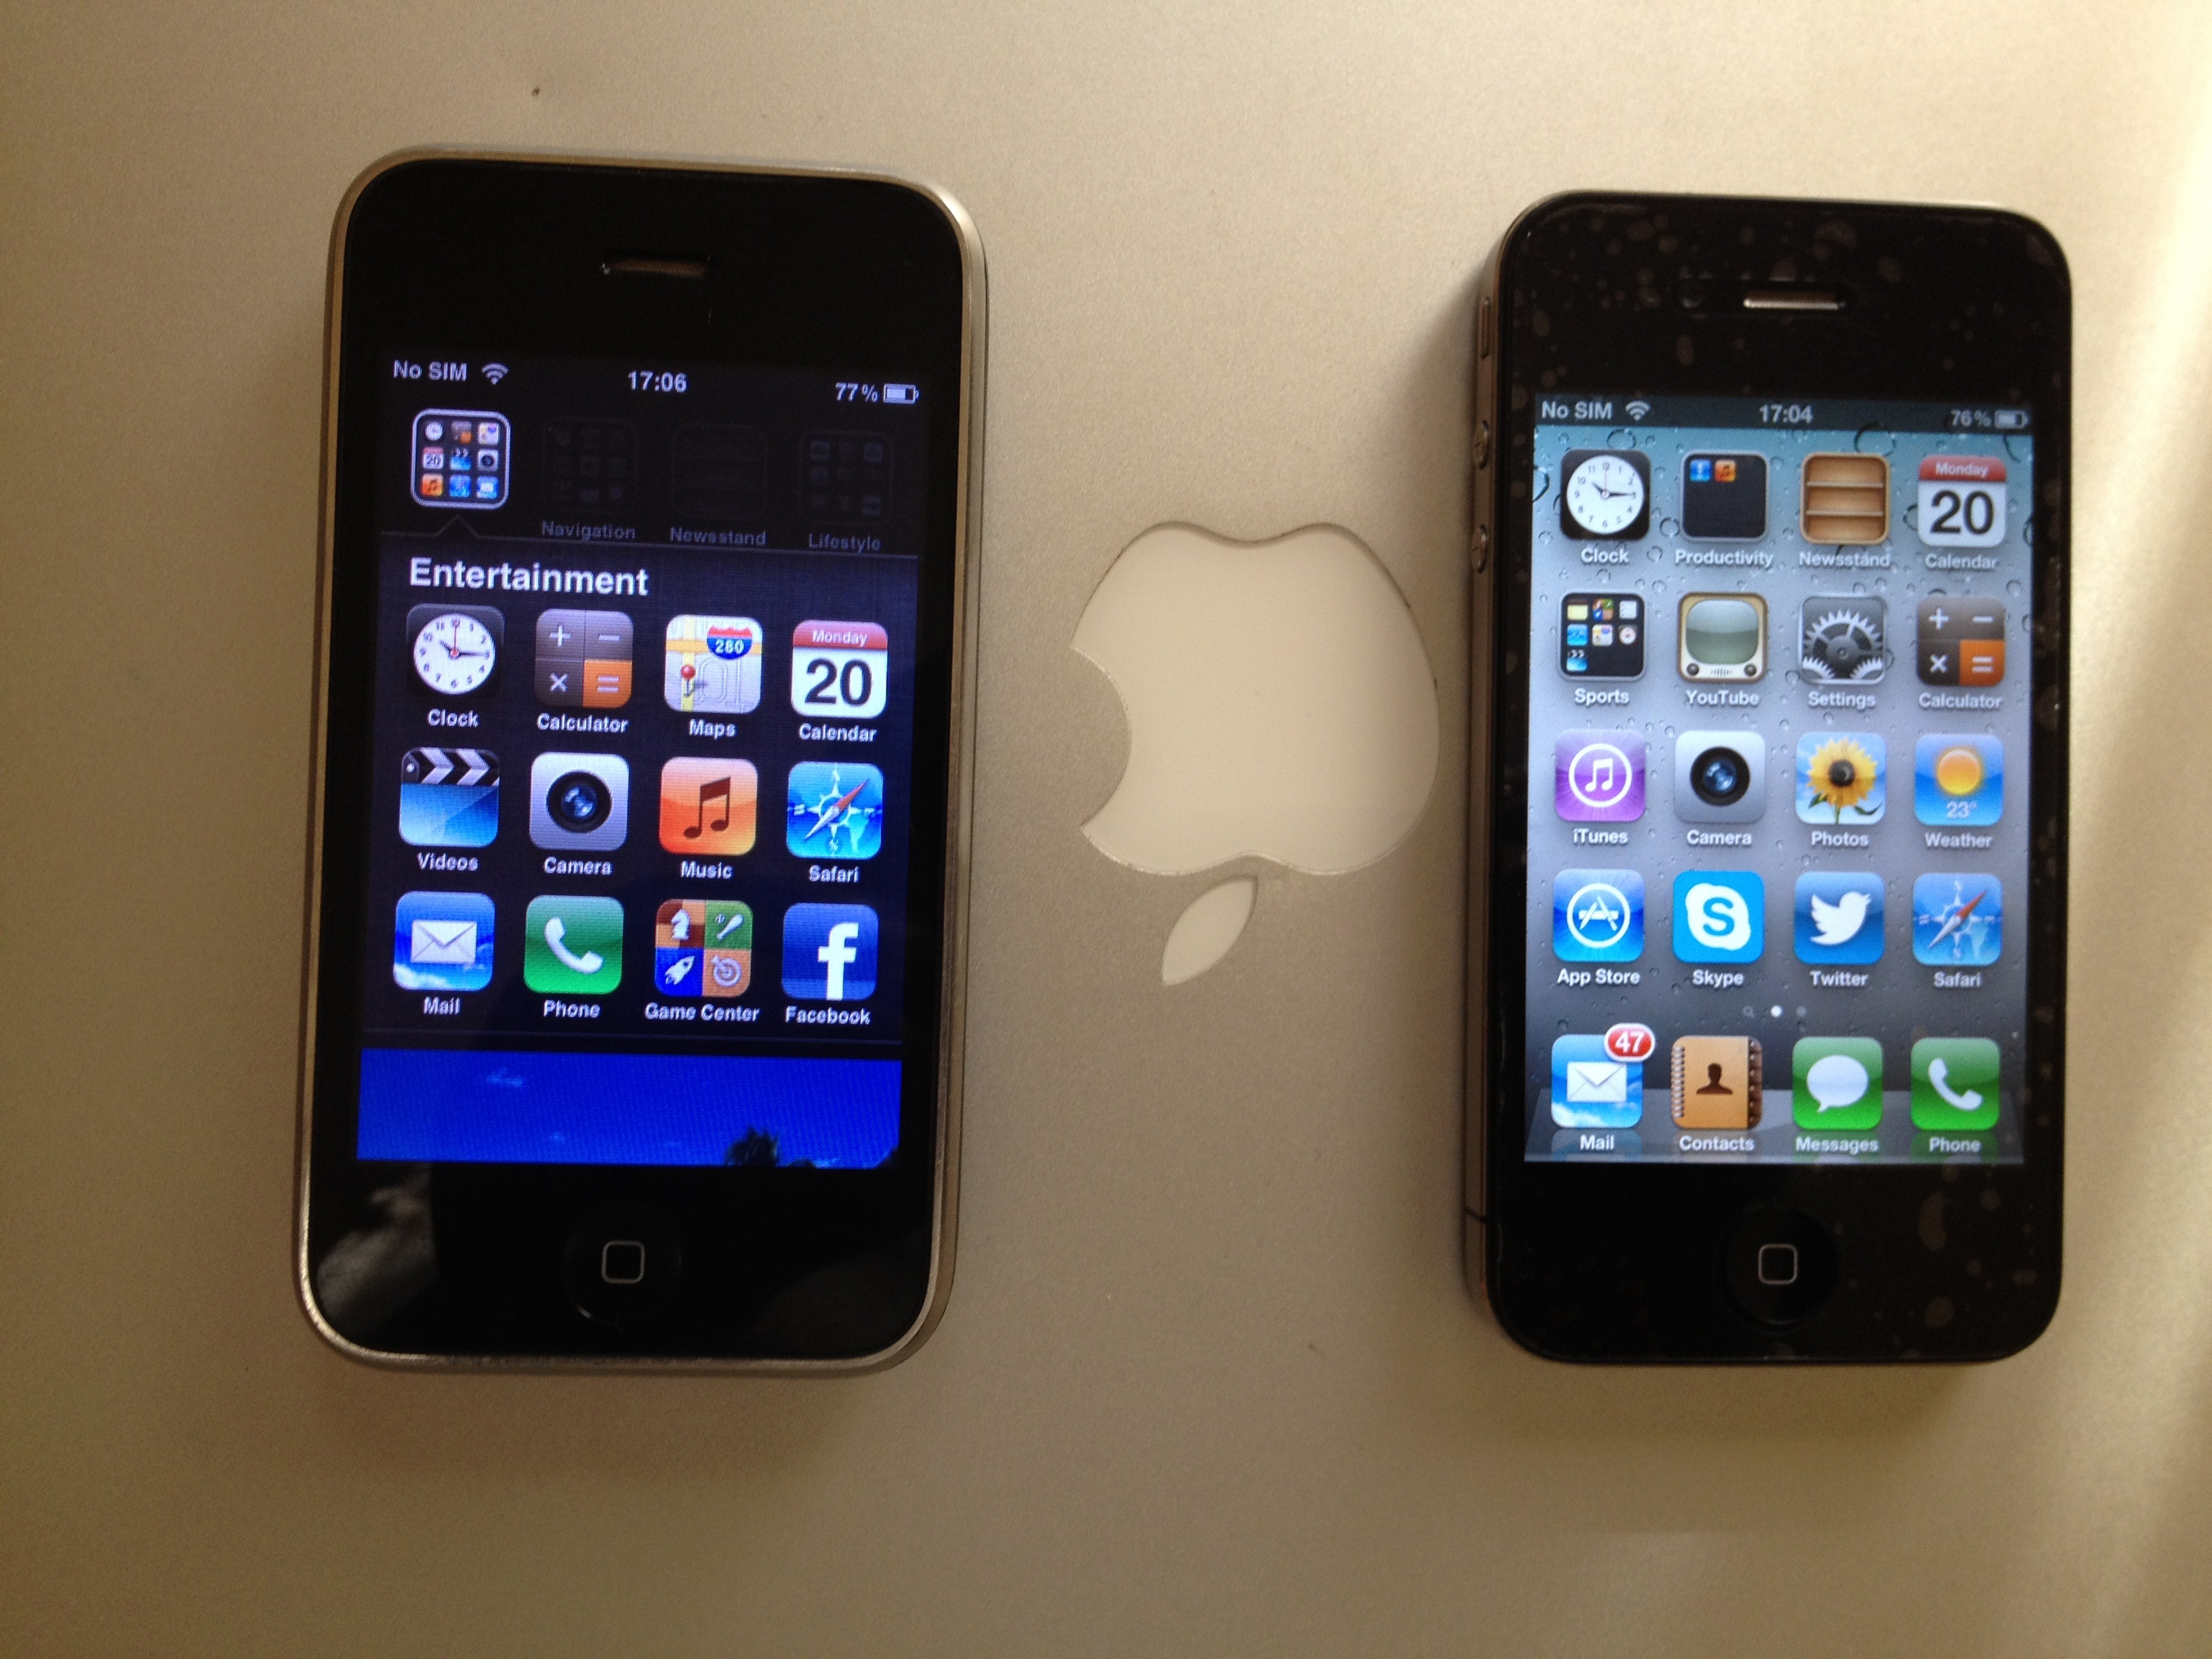 used iPhone 4S to take image of iPhone 4 on the right and iPhone 3GS ...